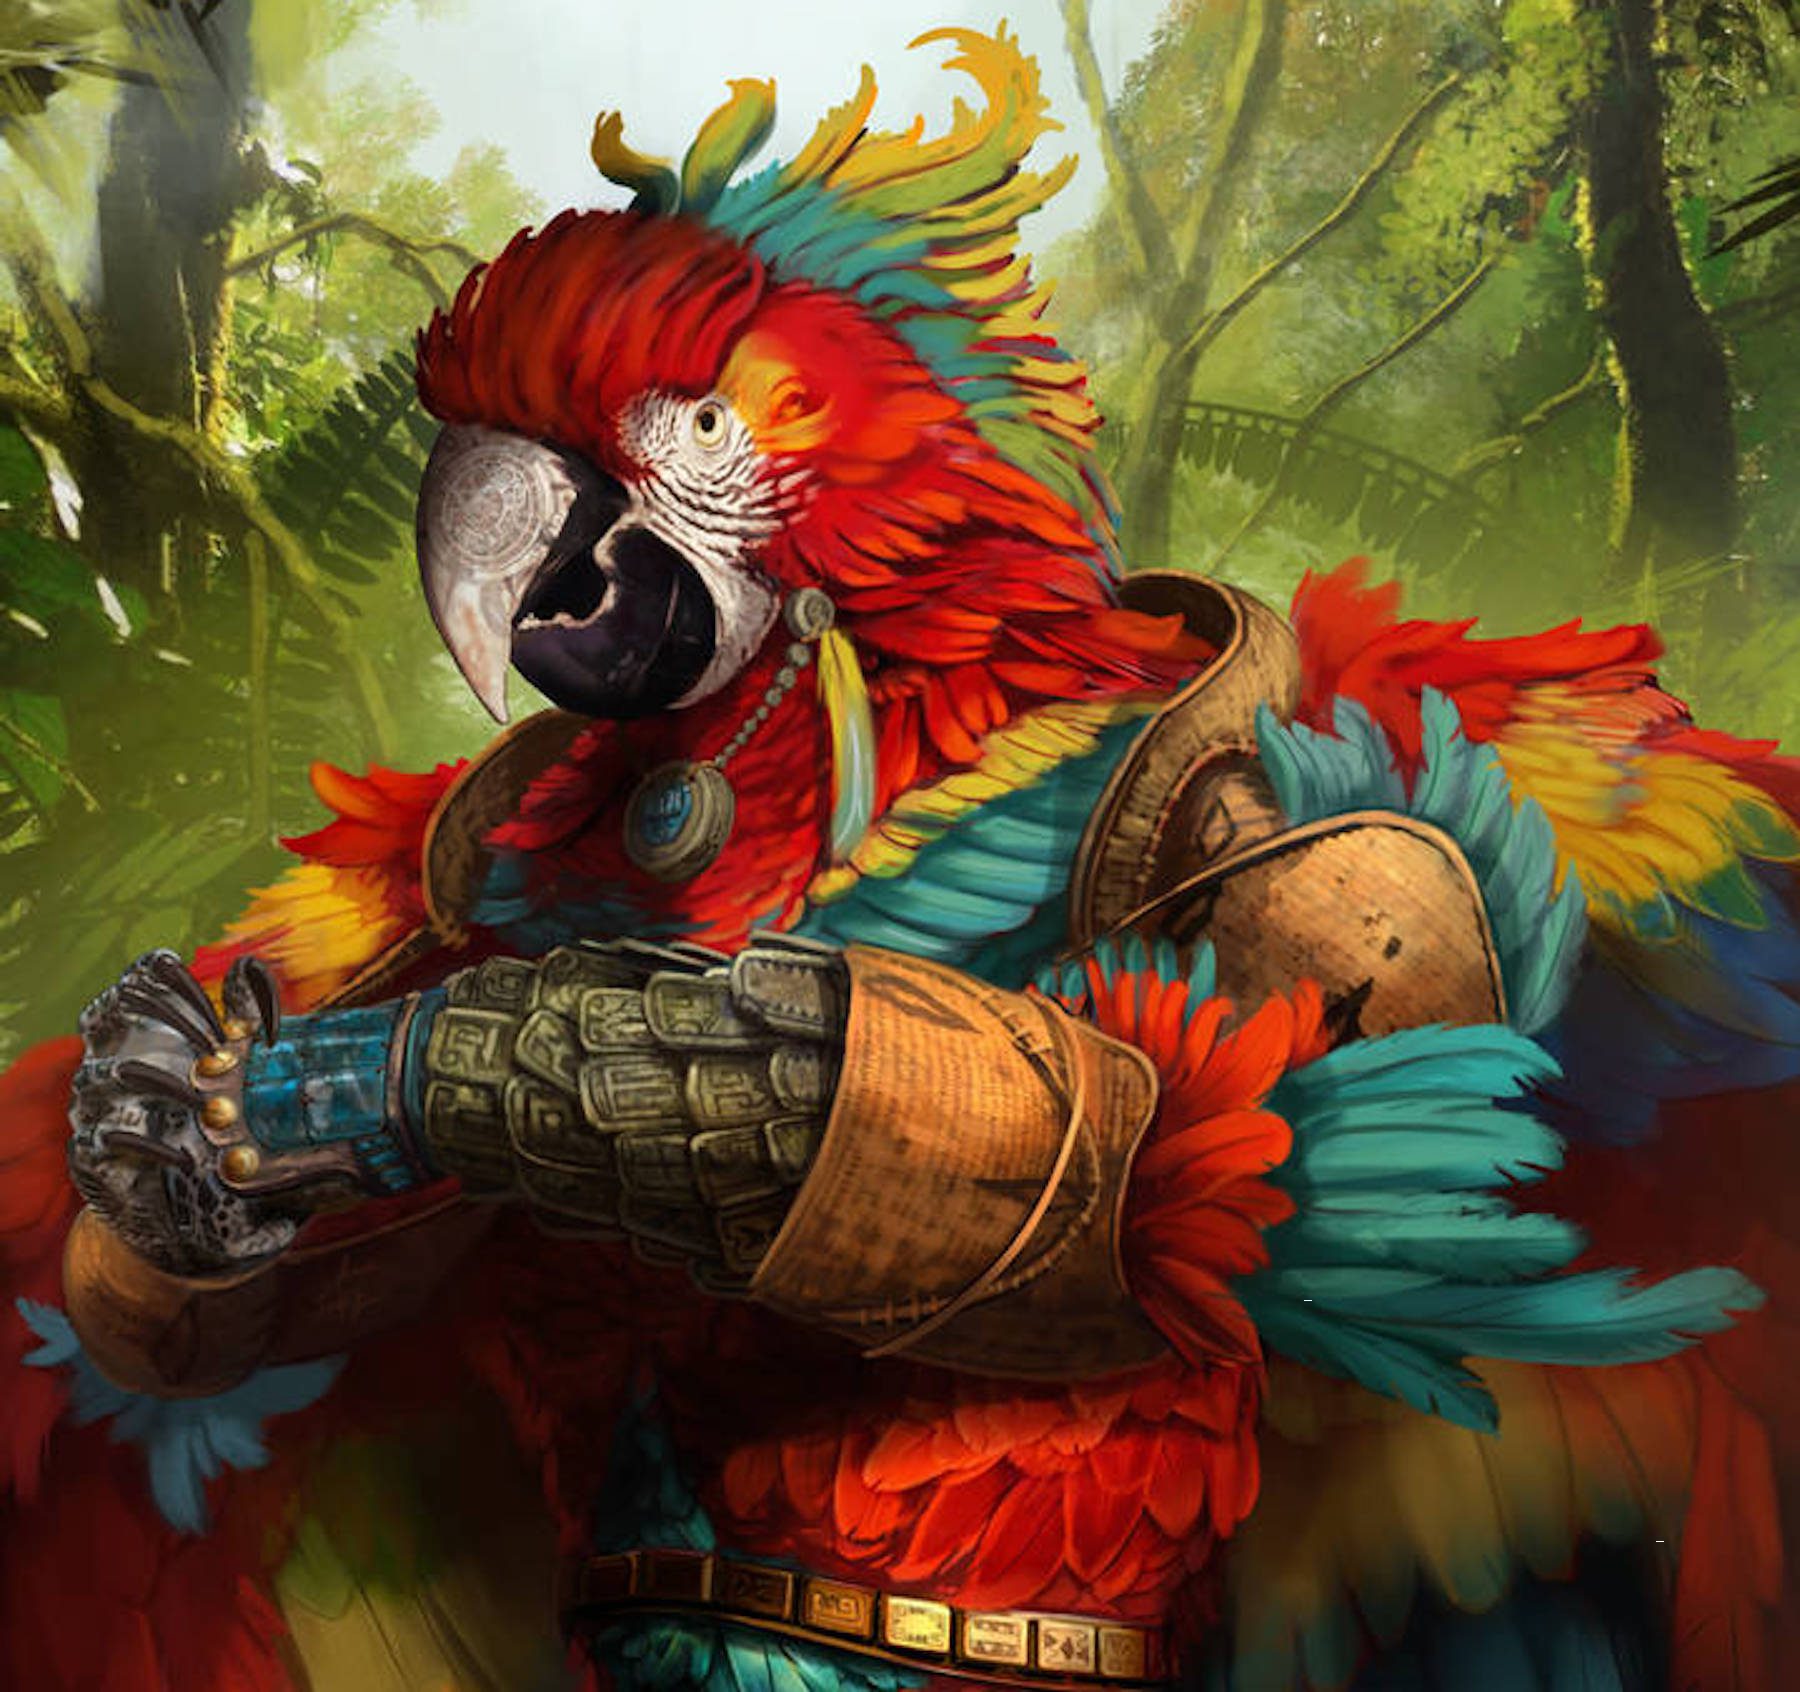 A red macaw monk from Dungeons and Dragons of a fighting subclass in a jungle or forest background.